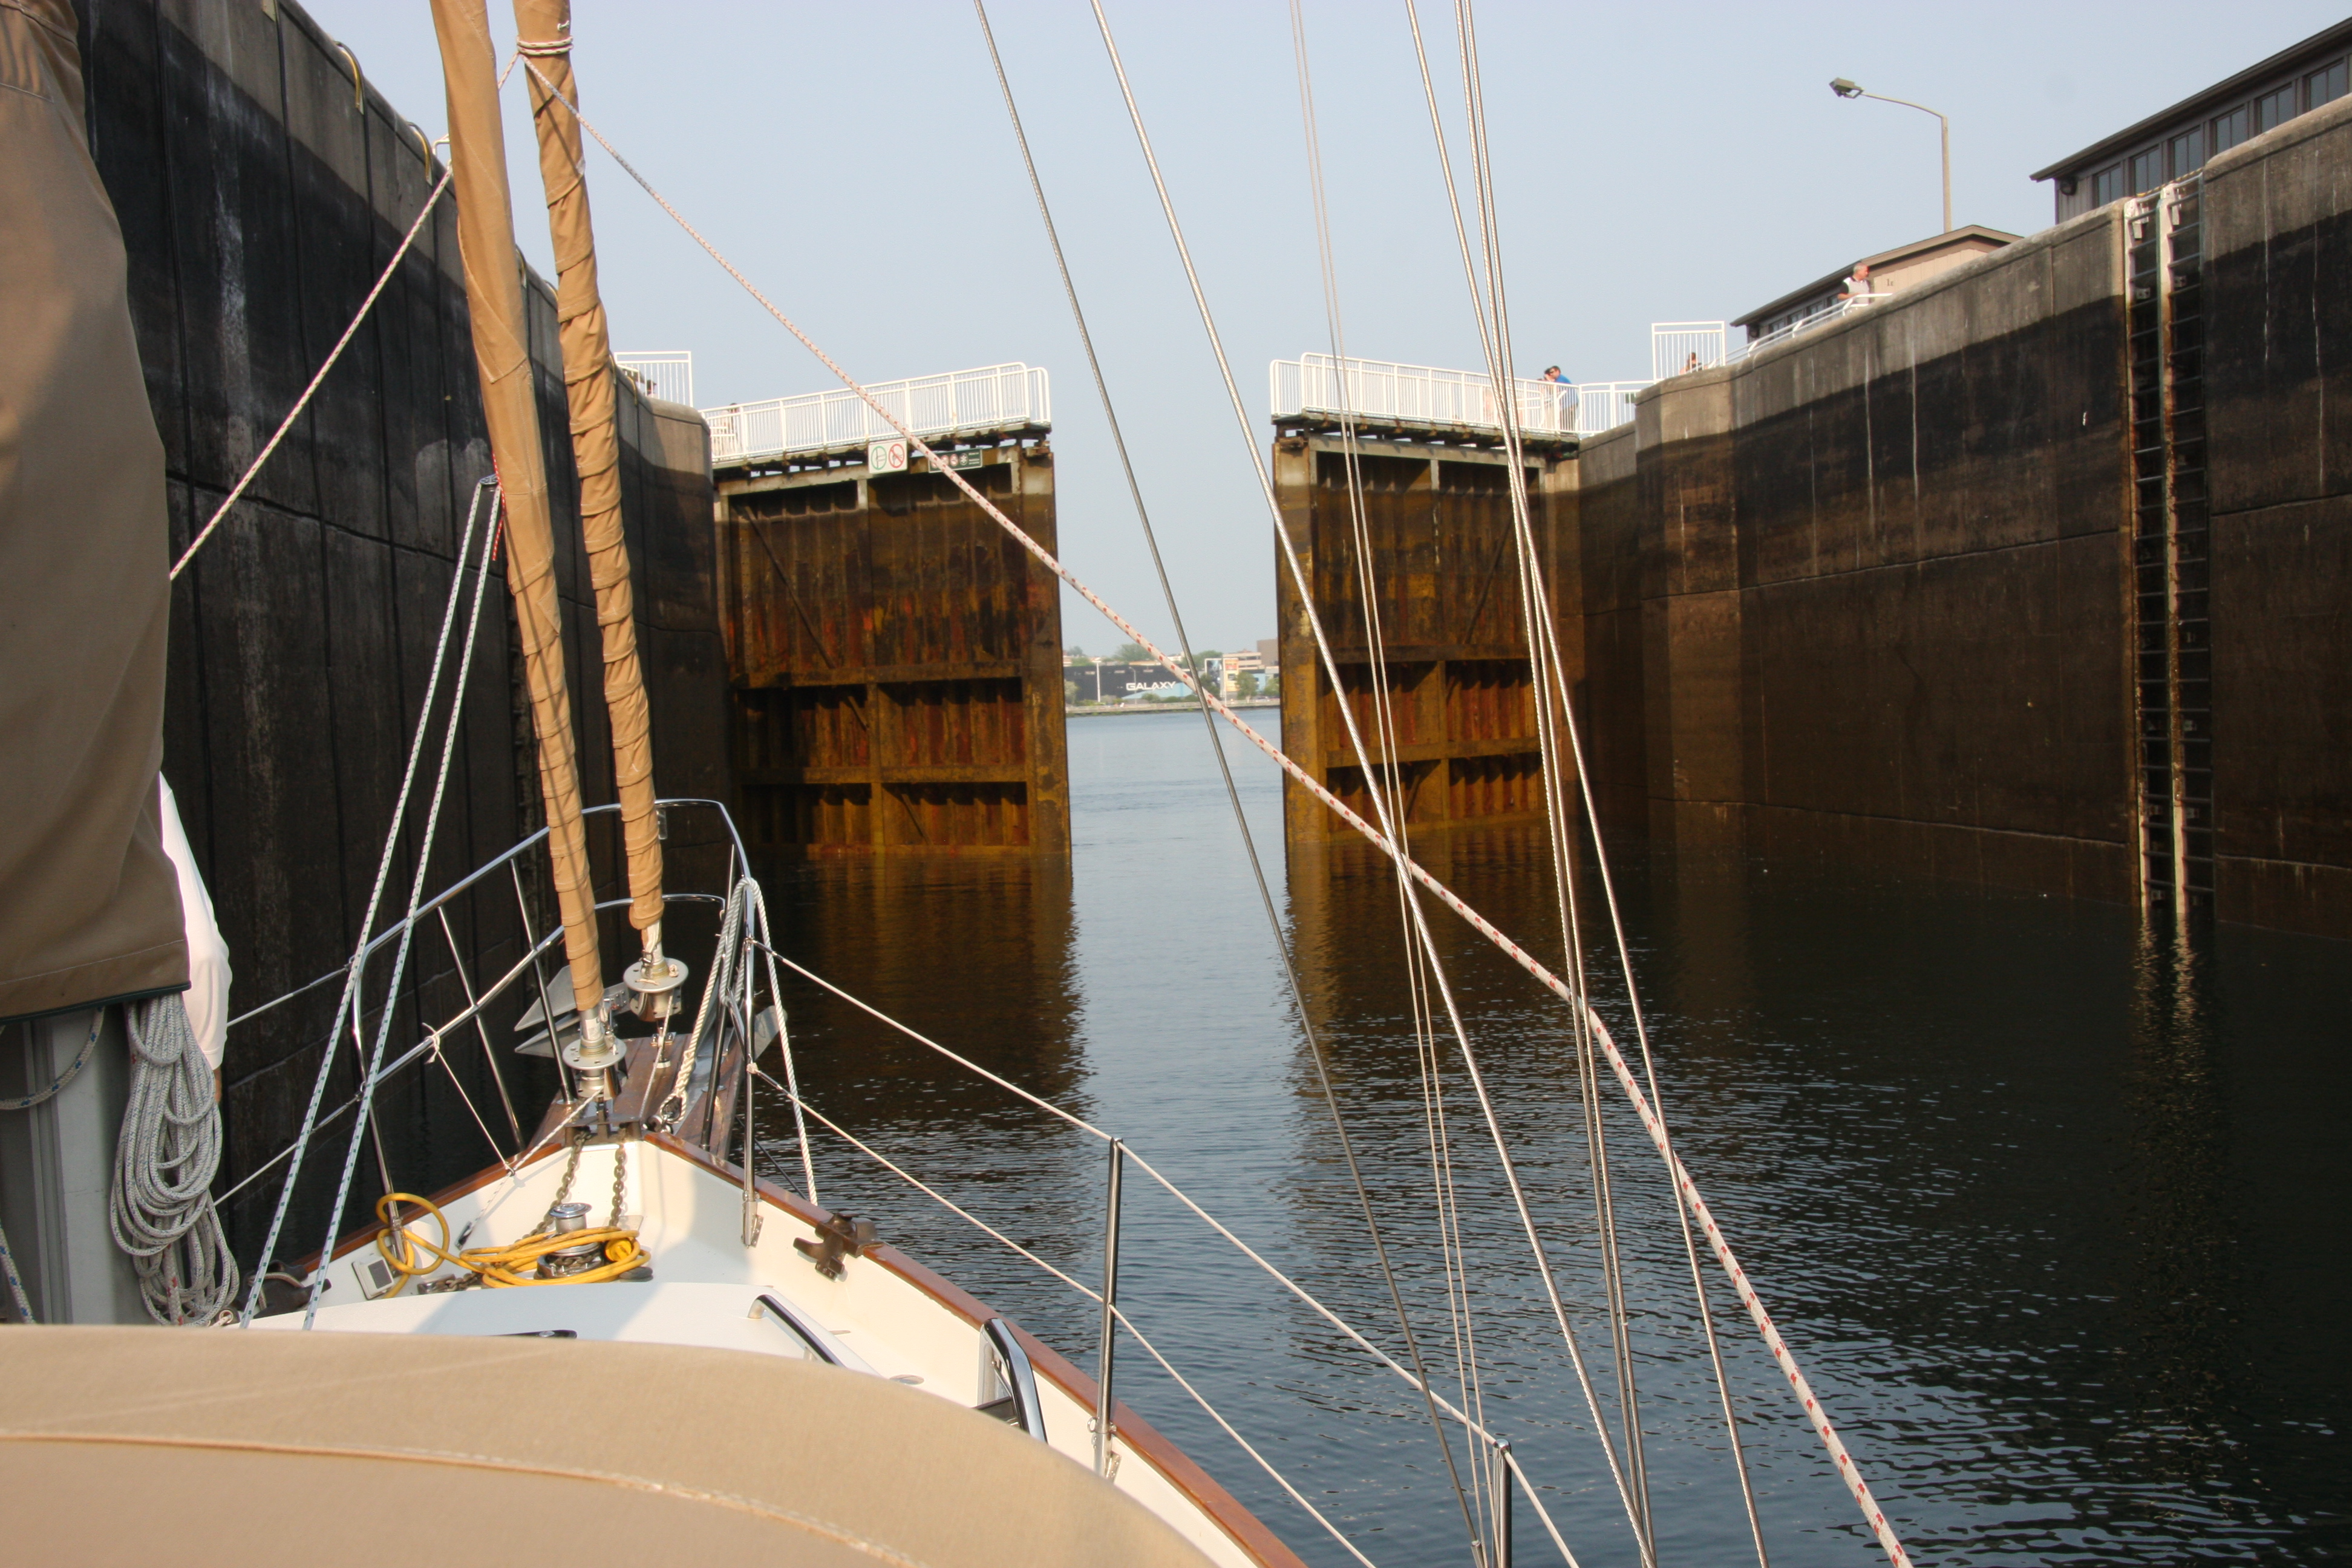 Heading for the Soo – July 5th